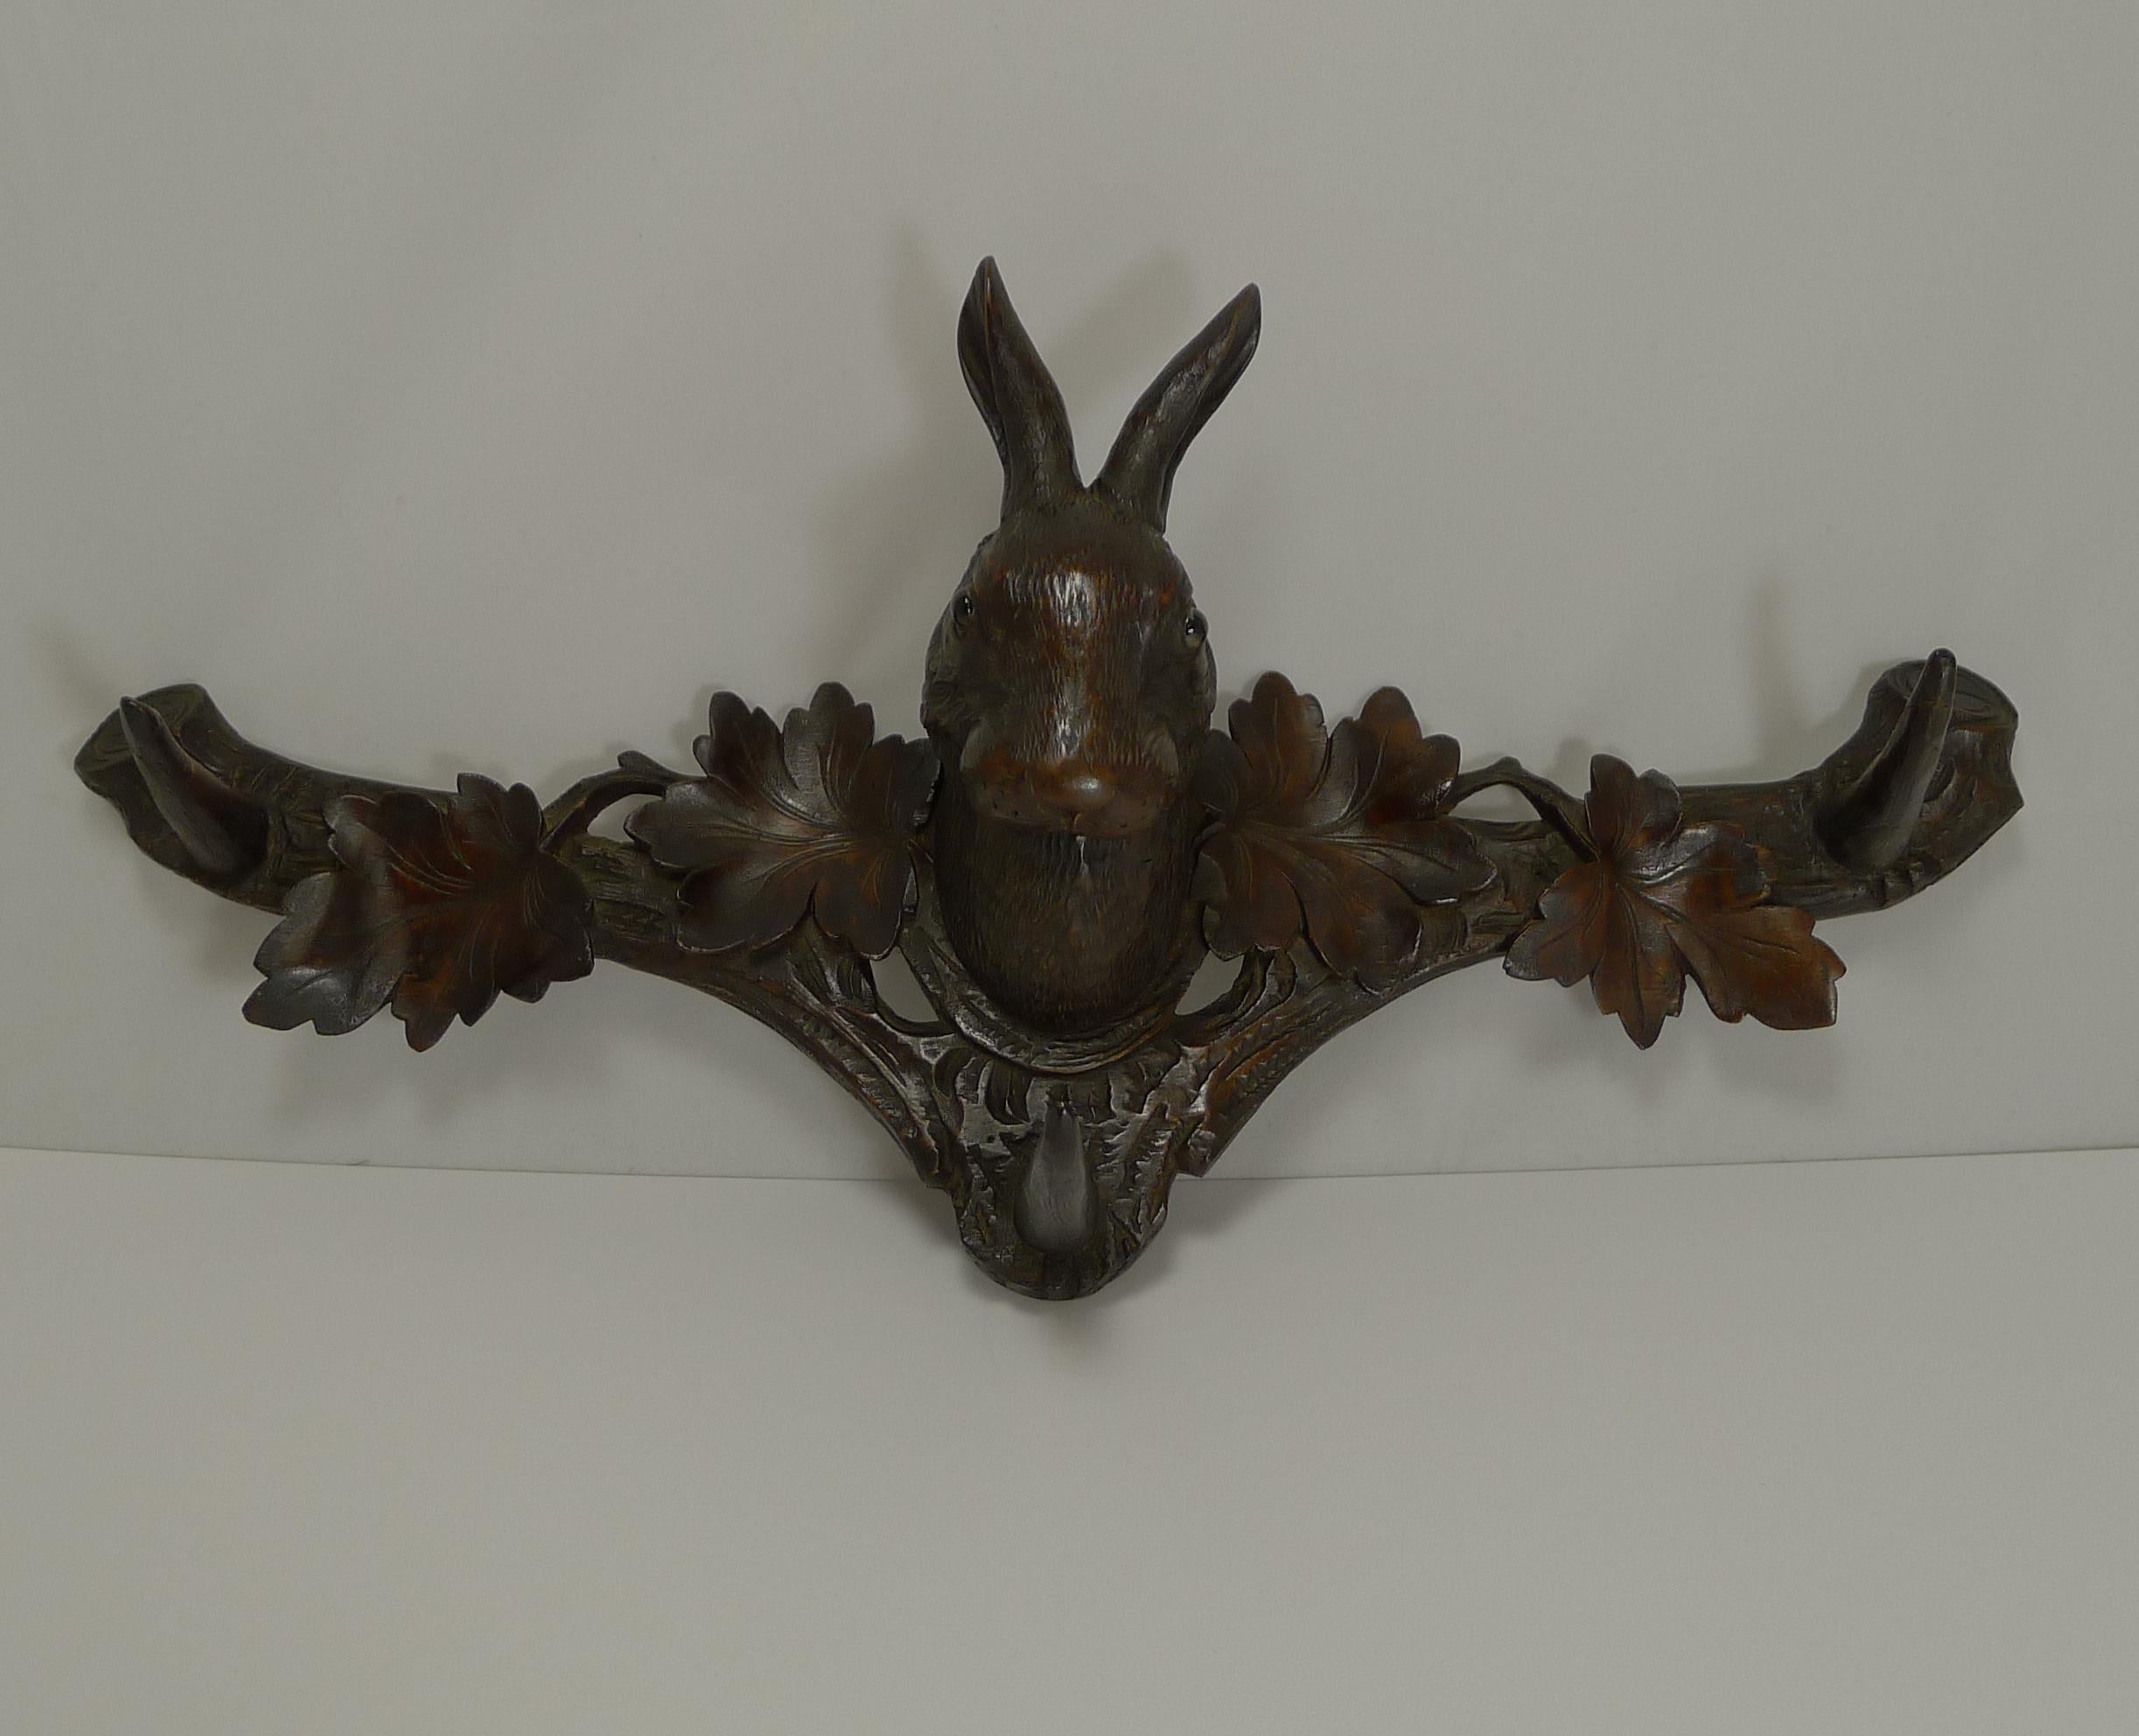 A fabulous wall hanging rack, beautifully hand-carved in the Black Forest region, circa 1890.

Of course what makes this so charming and collectible is the wonderful carved Hare or Rabbit to the middle, beautifully executed sporting his two glass